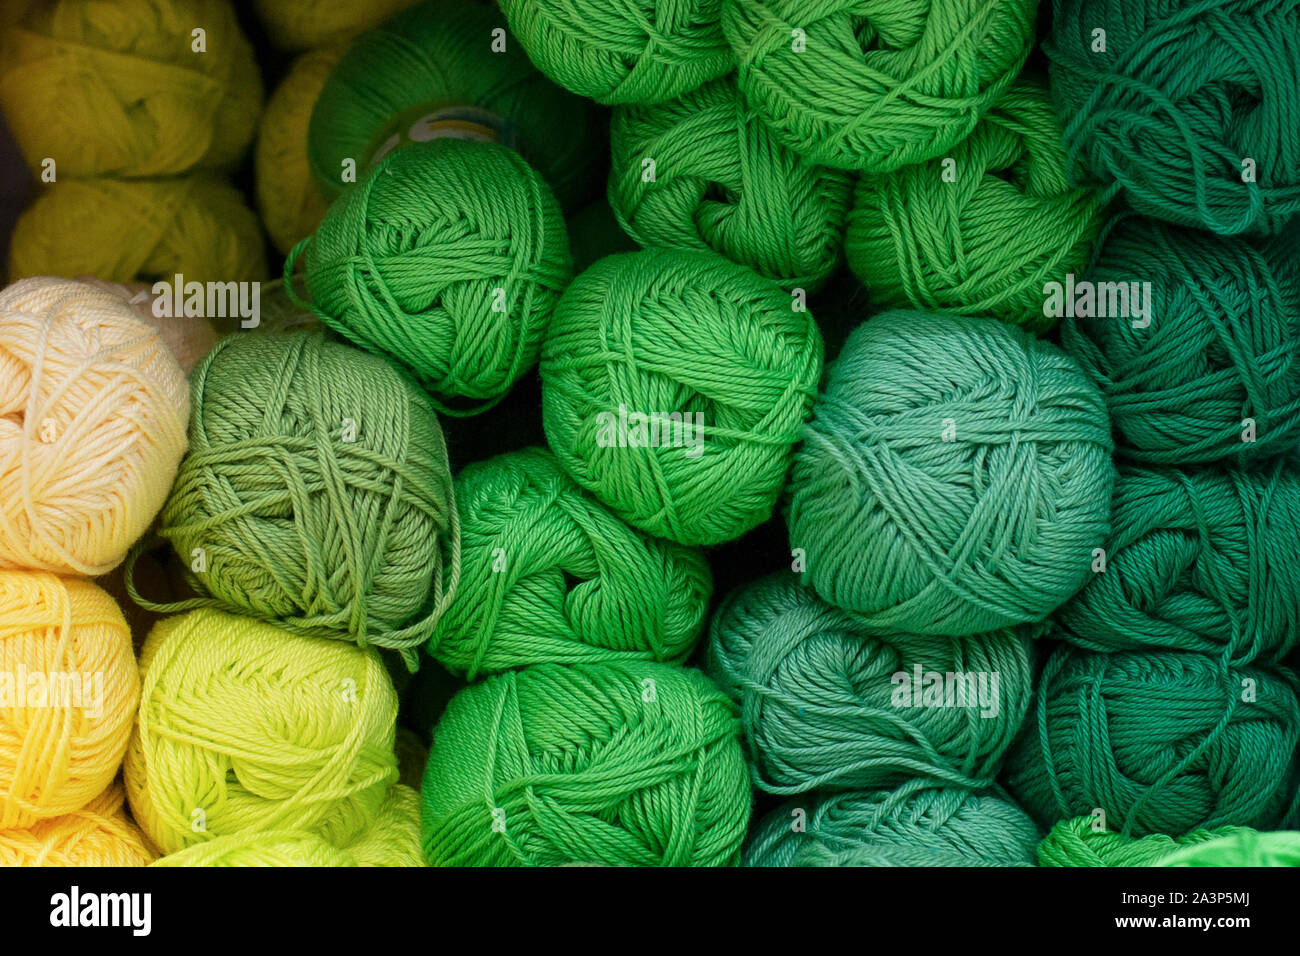 Colorful Yarn Balls Pile for Knitting and Crocheting stock photo